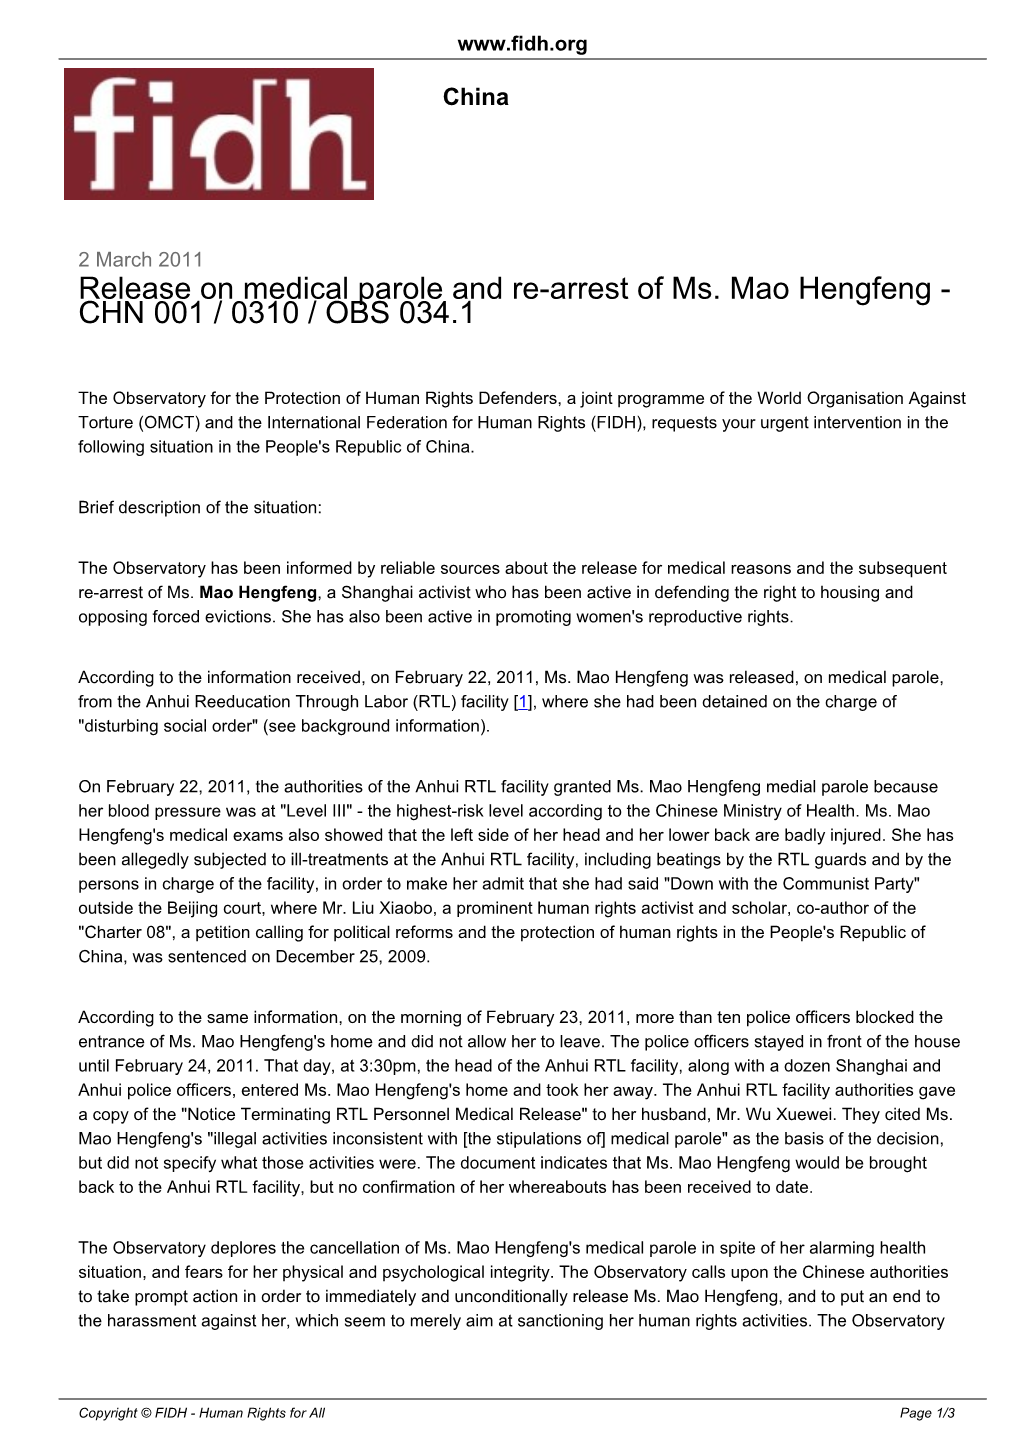 Release on Medical Parole and Re-Arrest of Ms. Mao Hengfeng - CHN 001 / 0310 / OBS 034.1